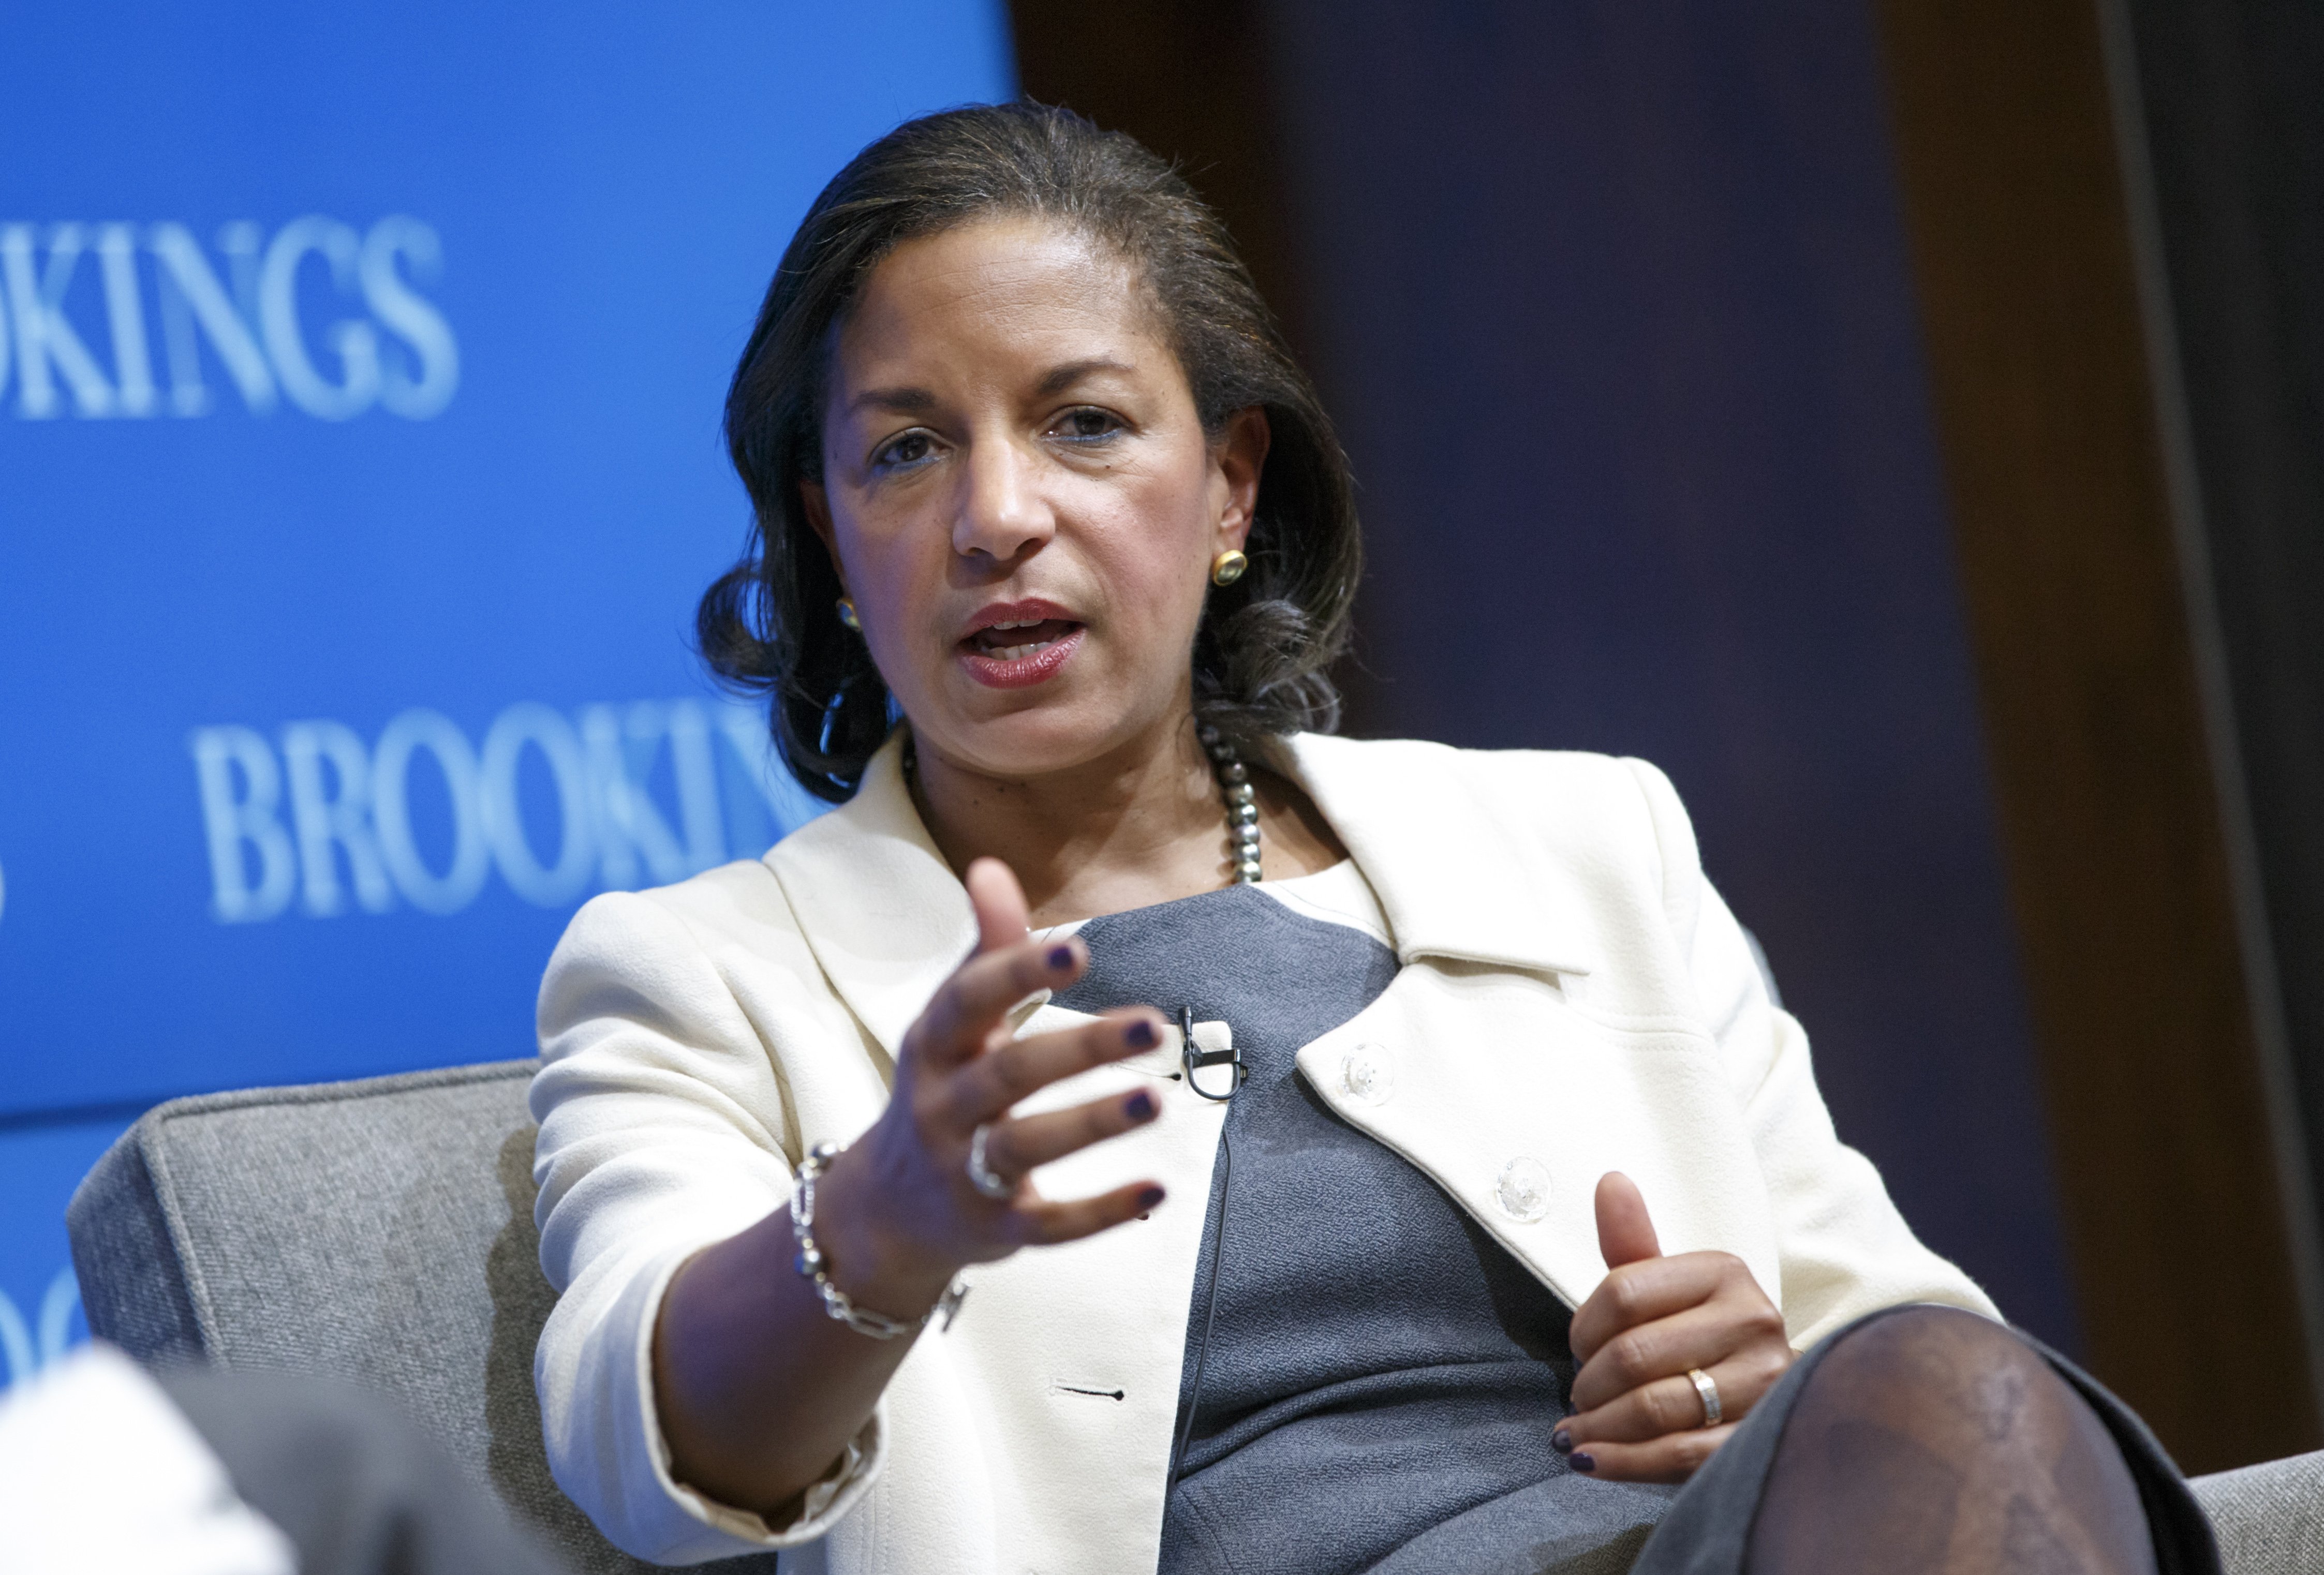 National Security Adviser Susan Rice speaks at the Brookings Institution to outline President Barack Obama's foreign policy priorities on Feb. 6, 2015, in Washington. (J. Scott Applewhite—AP)